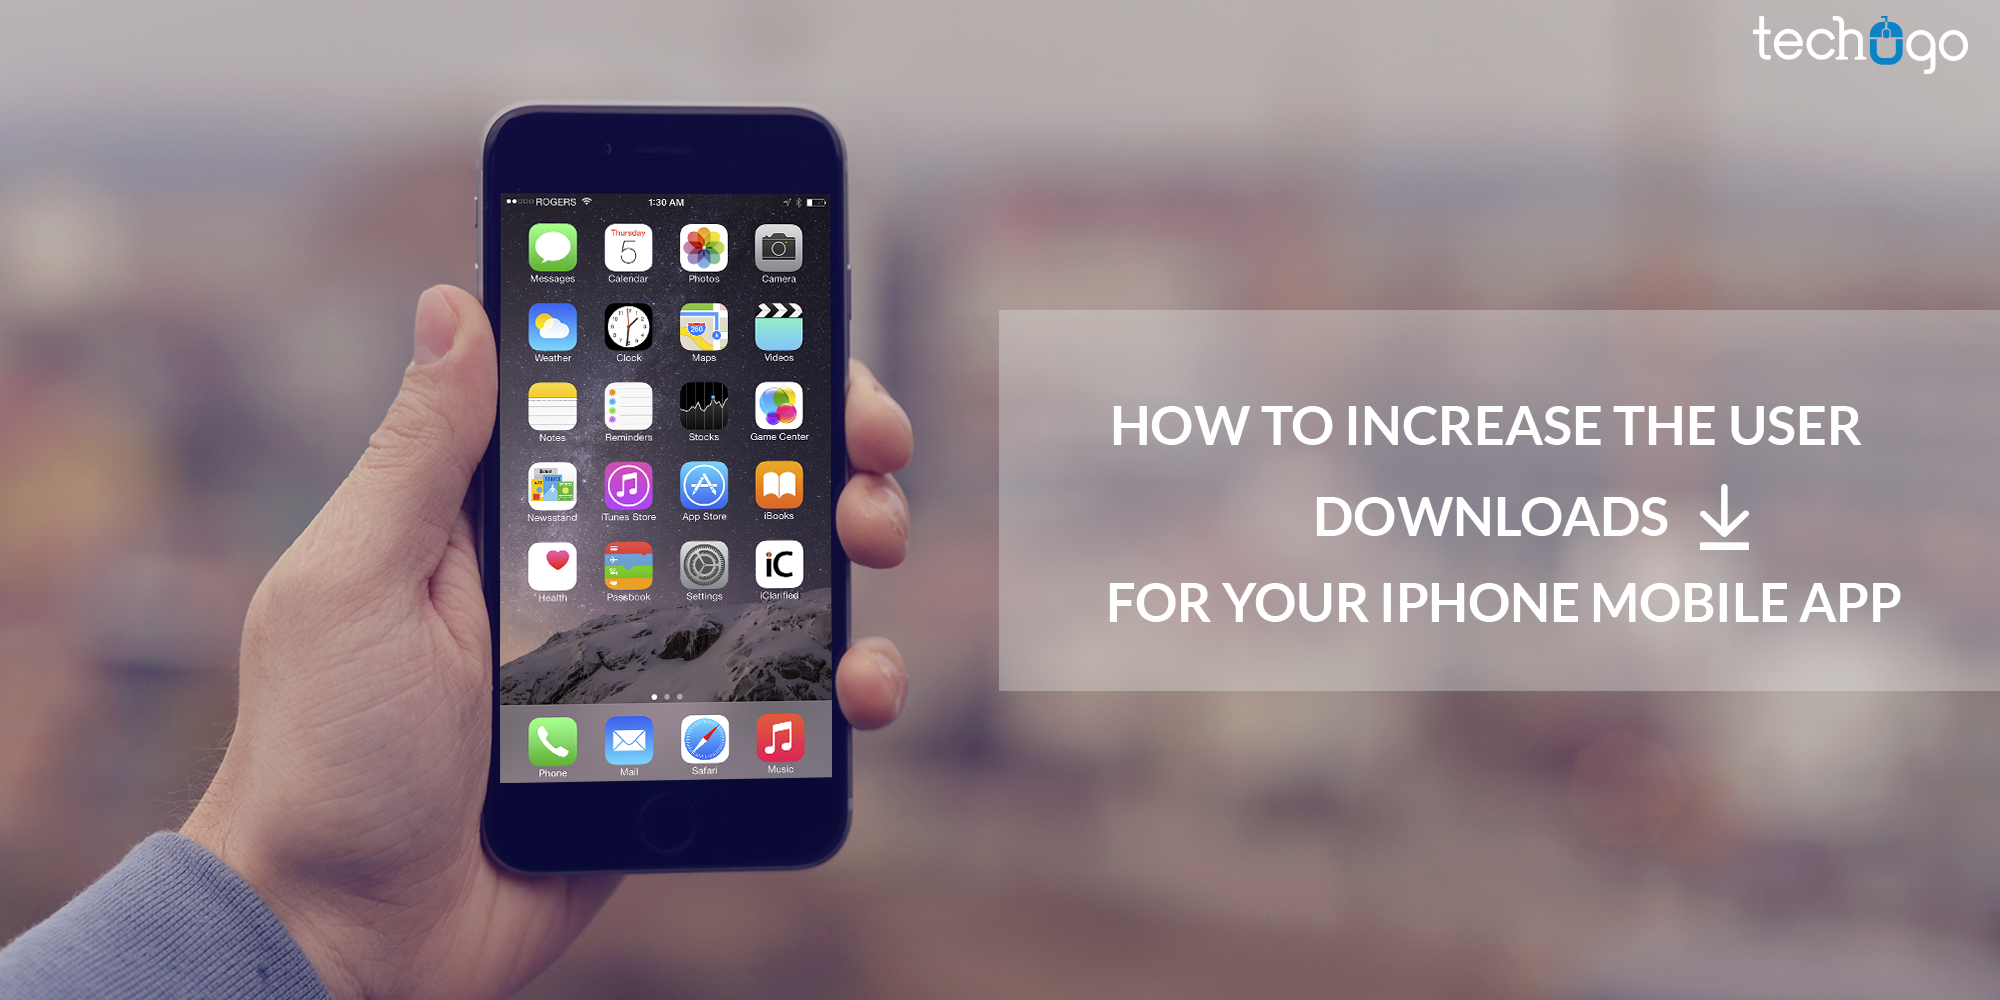 How To Increase The User Downloads For Your Iphone Mobile App